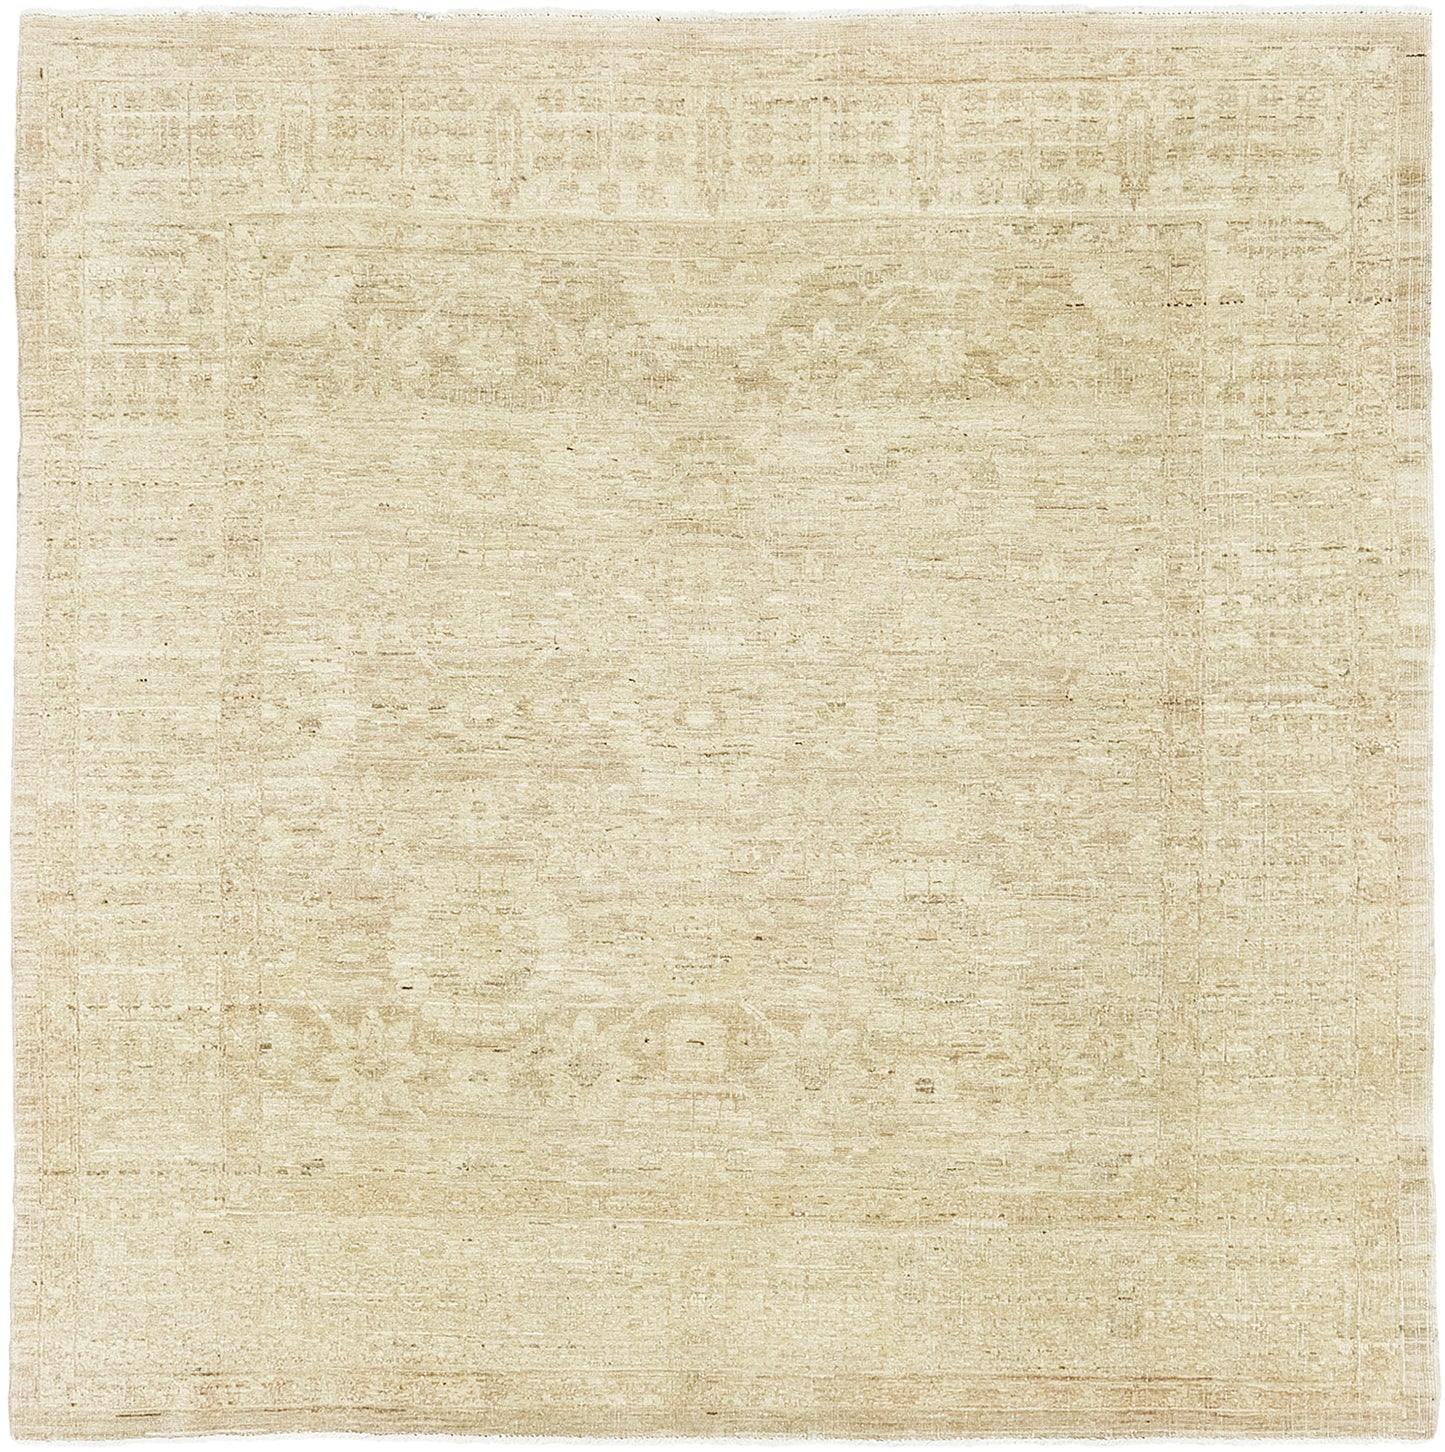 Vintage Style Sultanabad Revival Square Rug